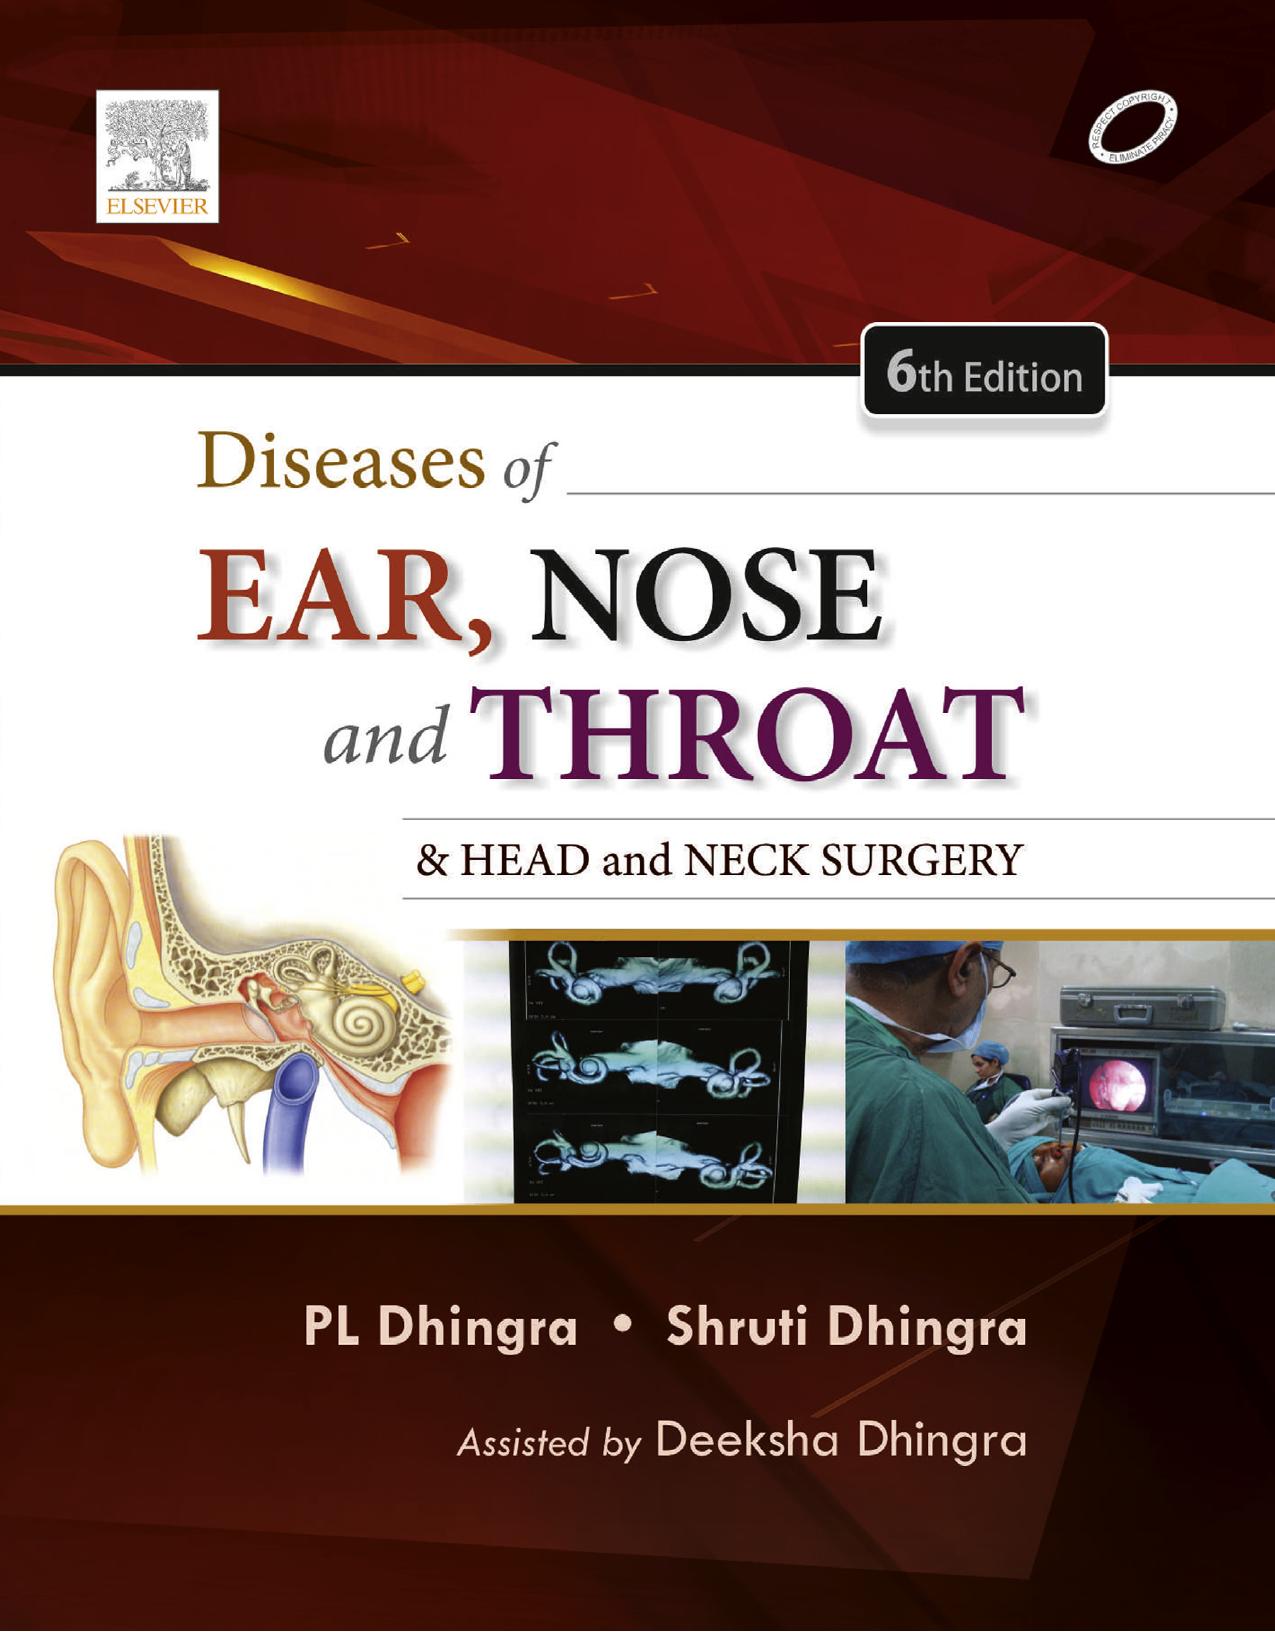 Diseases of Ear, Nose and Throat & Head and Neck Surgery, 6th Edition.jpg